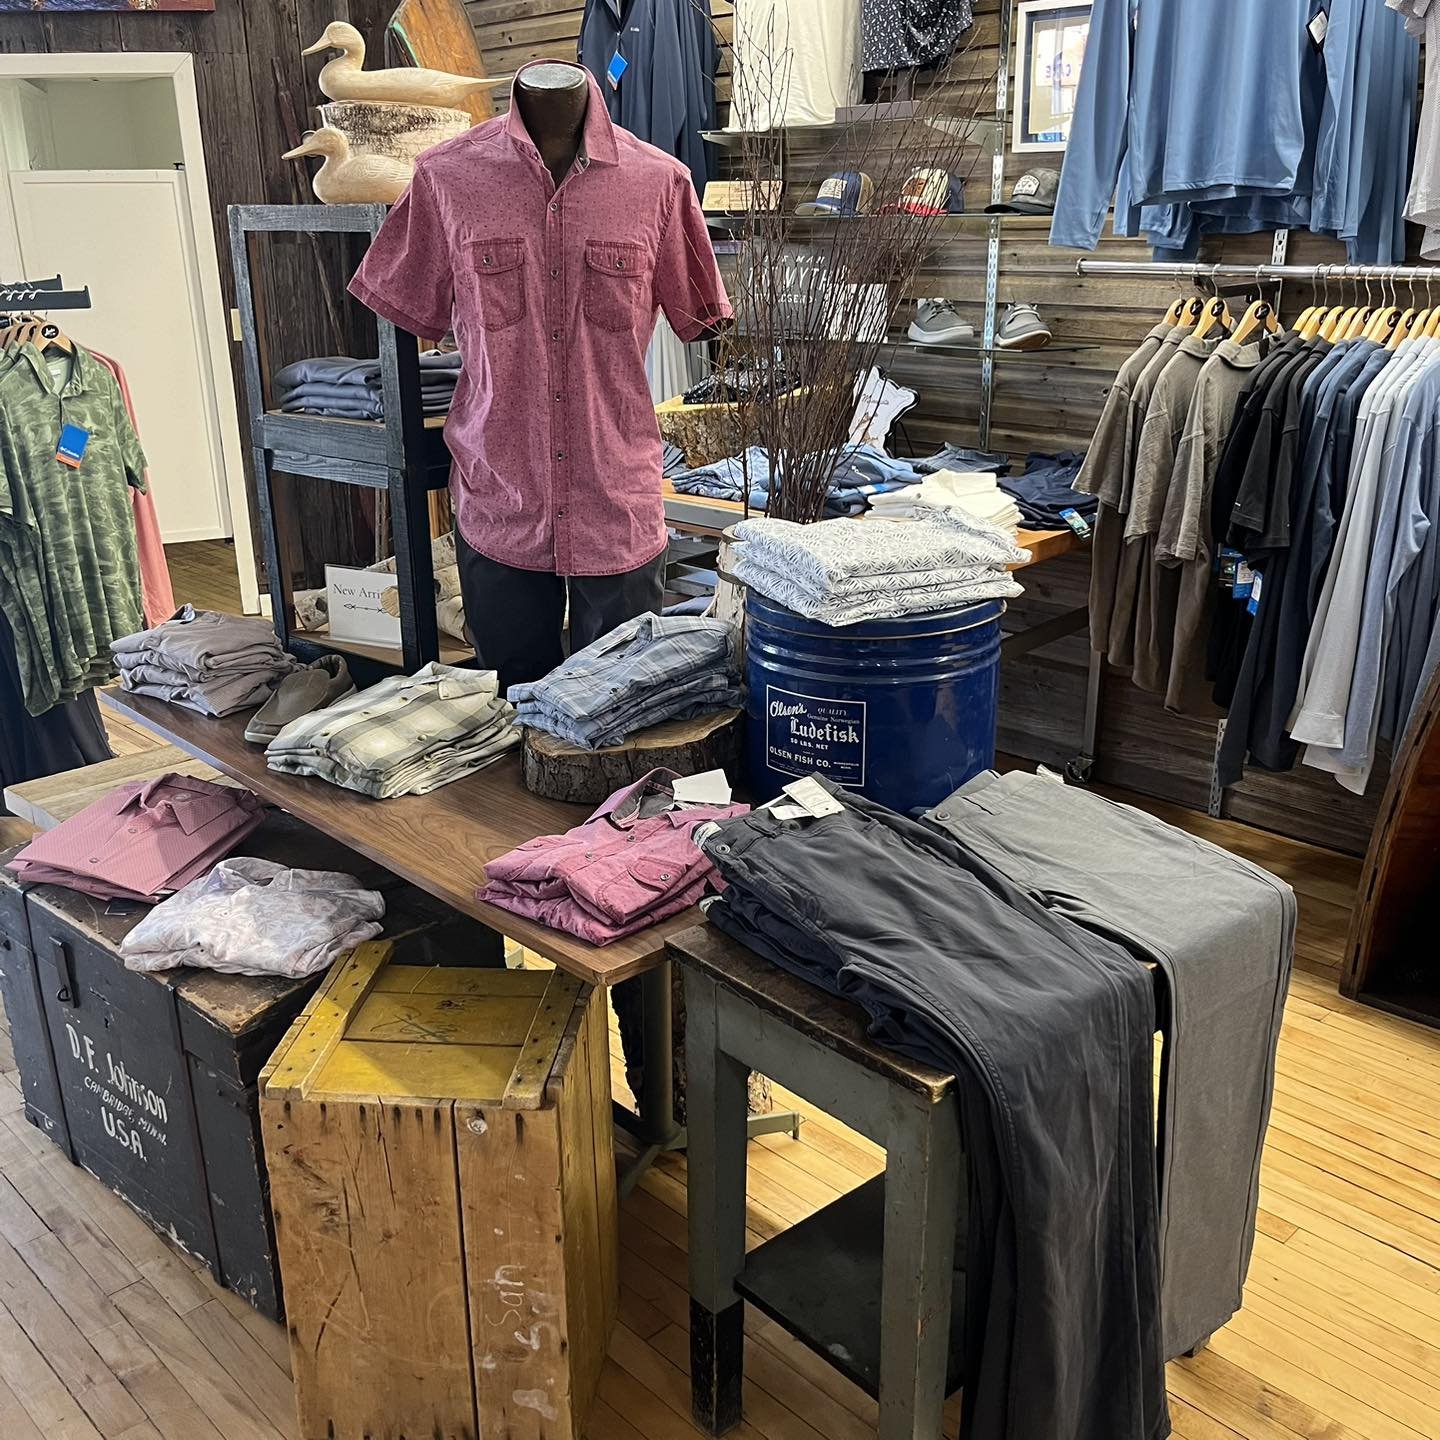 We have the areas best selection of Men&rsquo;s clothing with quality brands at affordable prices. 
Our retail team is equipped &amp; ready to assist you with finding the right fit. 👕 👖 👔 
.
.
.
.
#mnsmallbiz #mnshopsmall #leader1918 #mnboutique #